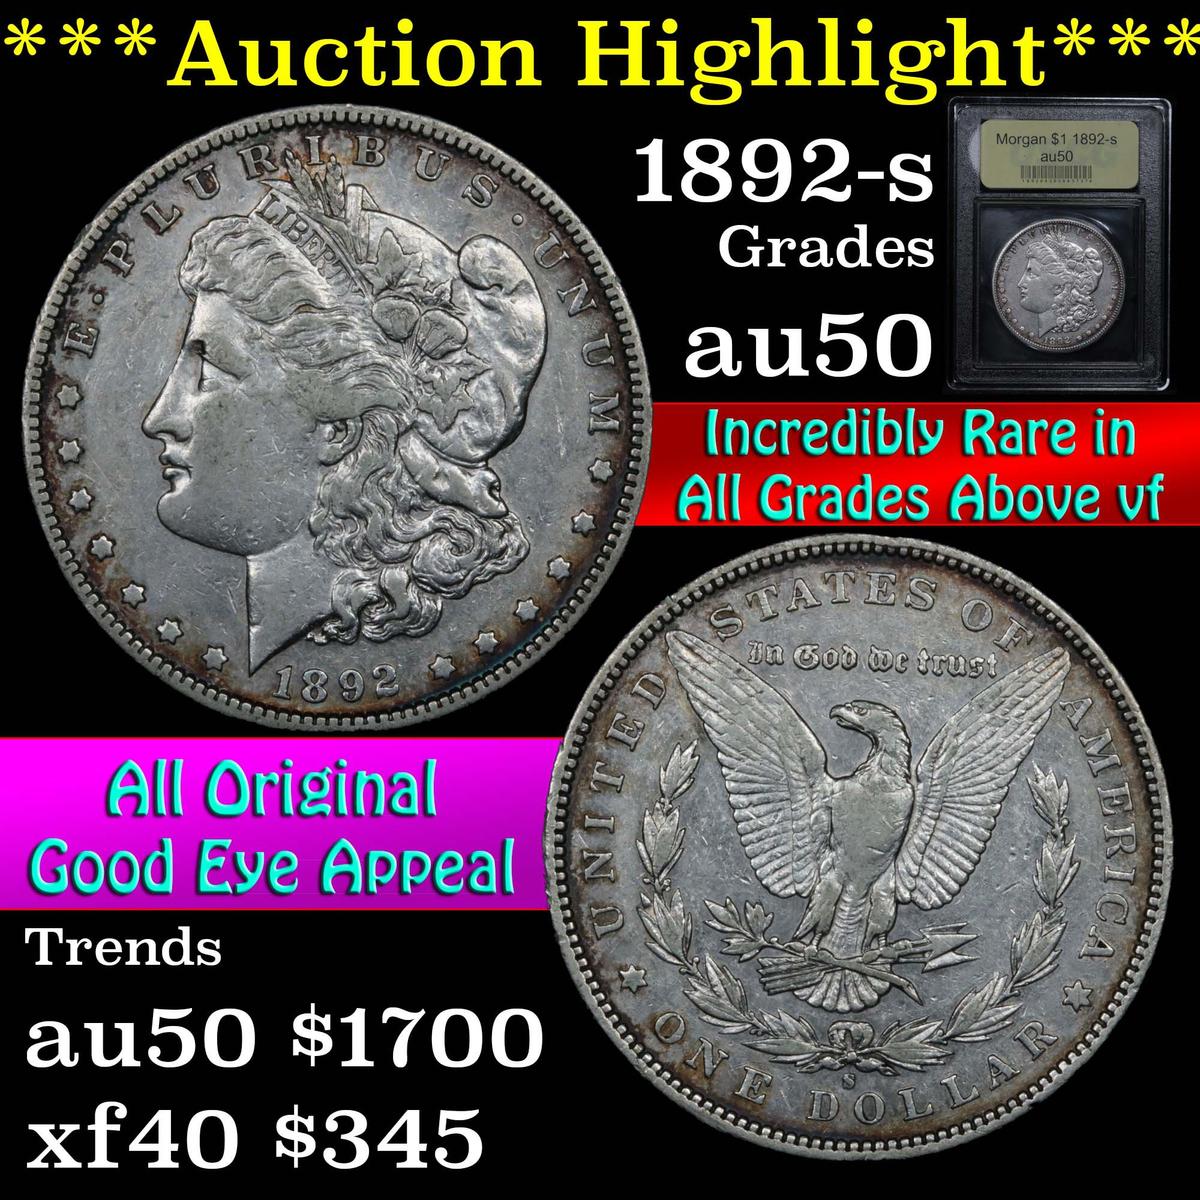 ***Auction Highlight*** 1892-s Morgan Dollar $1 Graded AU, Almost Unc By USCG (fc)